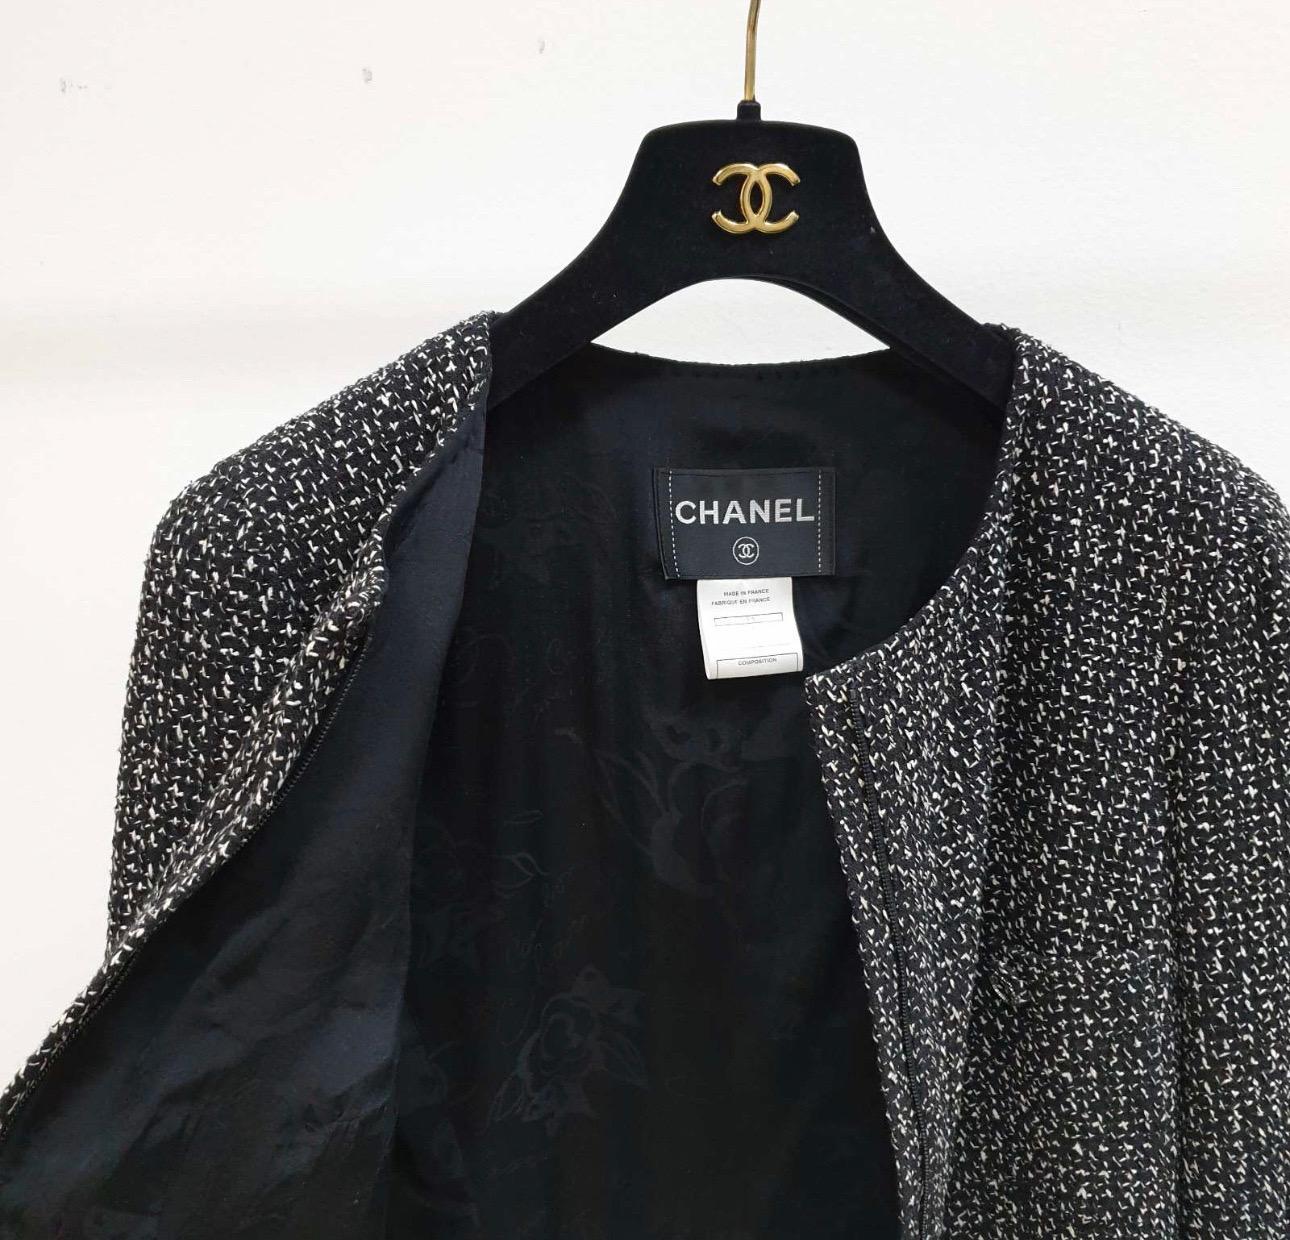 Chanel Evening Jacket
Fall/Winter 2008 Collection by Karl Lagerfeld 
Black with White Specks 
Tweed
Chain-Link Detail 
2 Pockets 
Zip Closure 
Composition: 100% Silk
One button on the sleeve is missing.
Very good condition.
Hanger is not included.